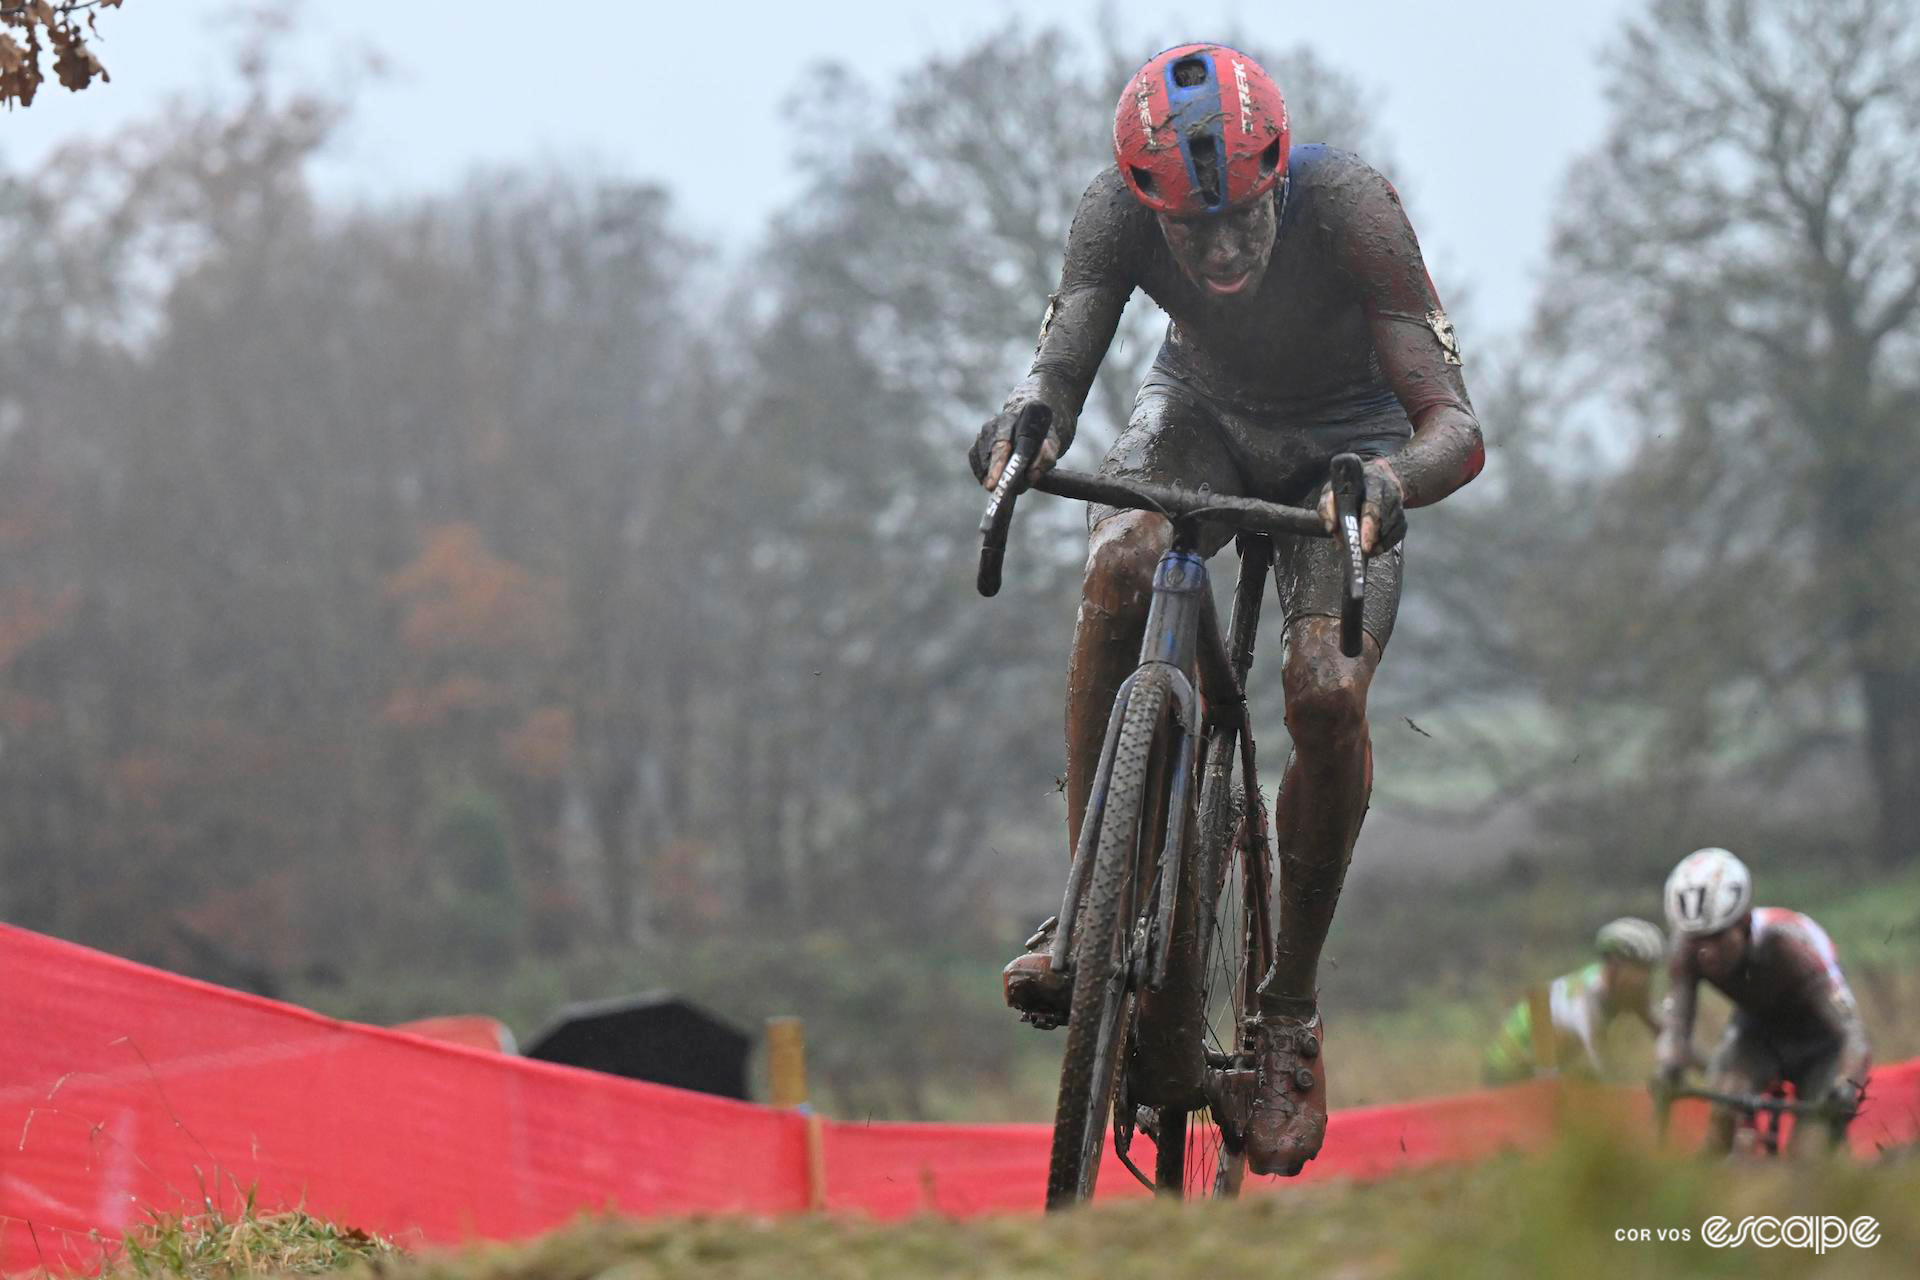 Head-on shot of Pim Ronhaar who is barely recognisable beneath the mud as he takes the lead in the final lap of CX World Cup Dublin, Eli Iserbyt and Laurens Sweeck just visible in pursuit.